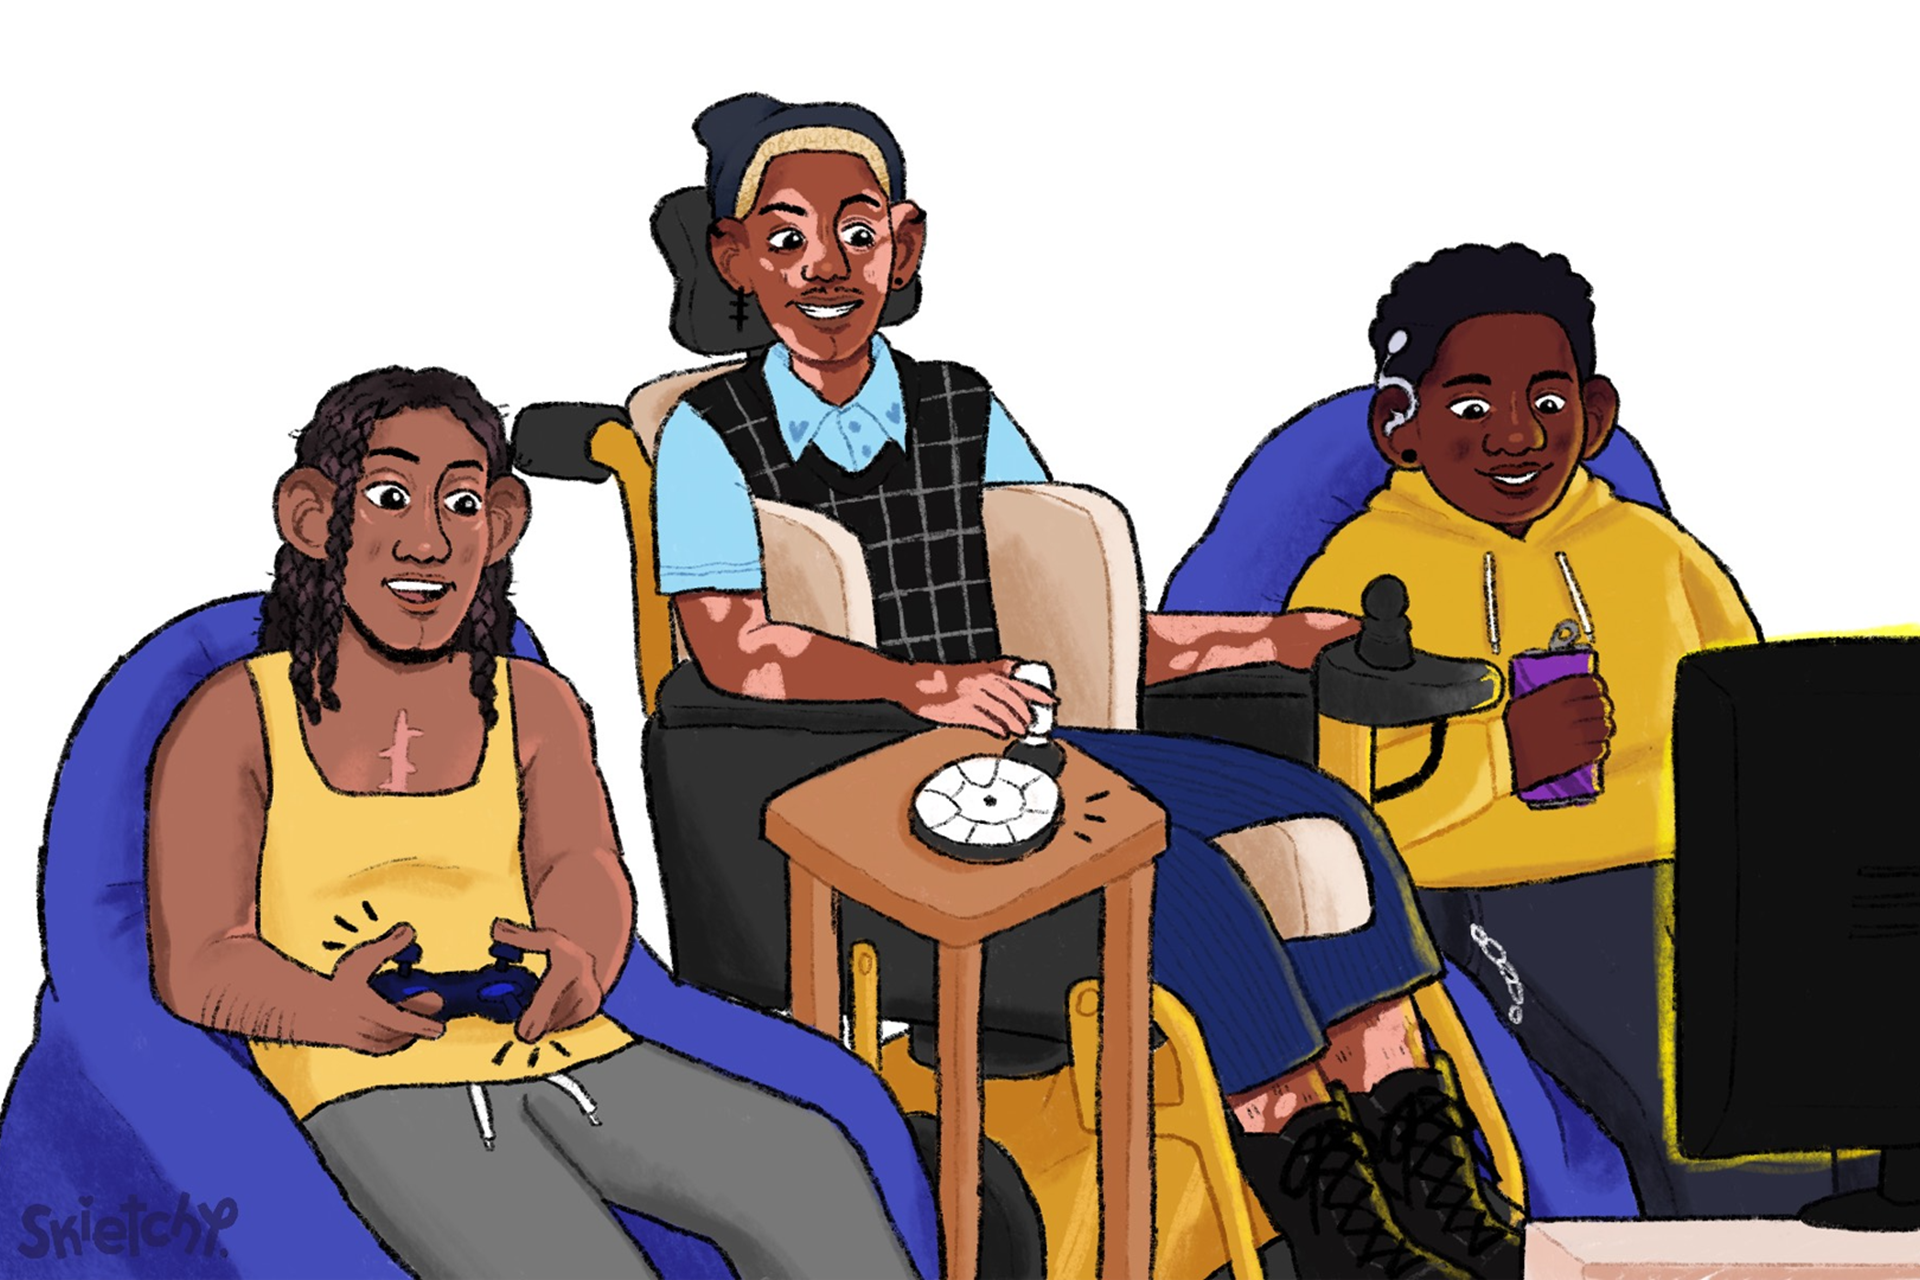 3 Black young people are playing video games together.